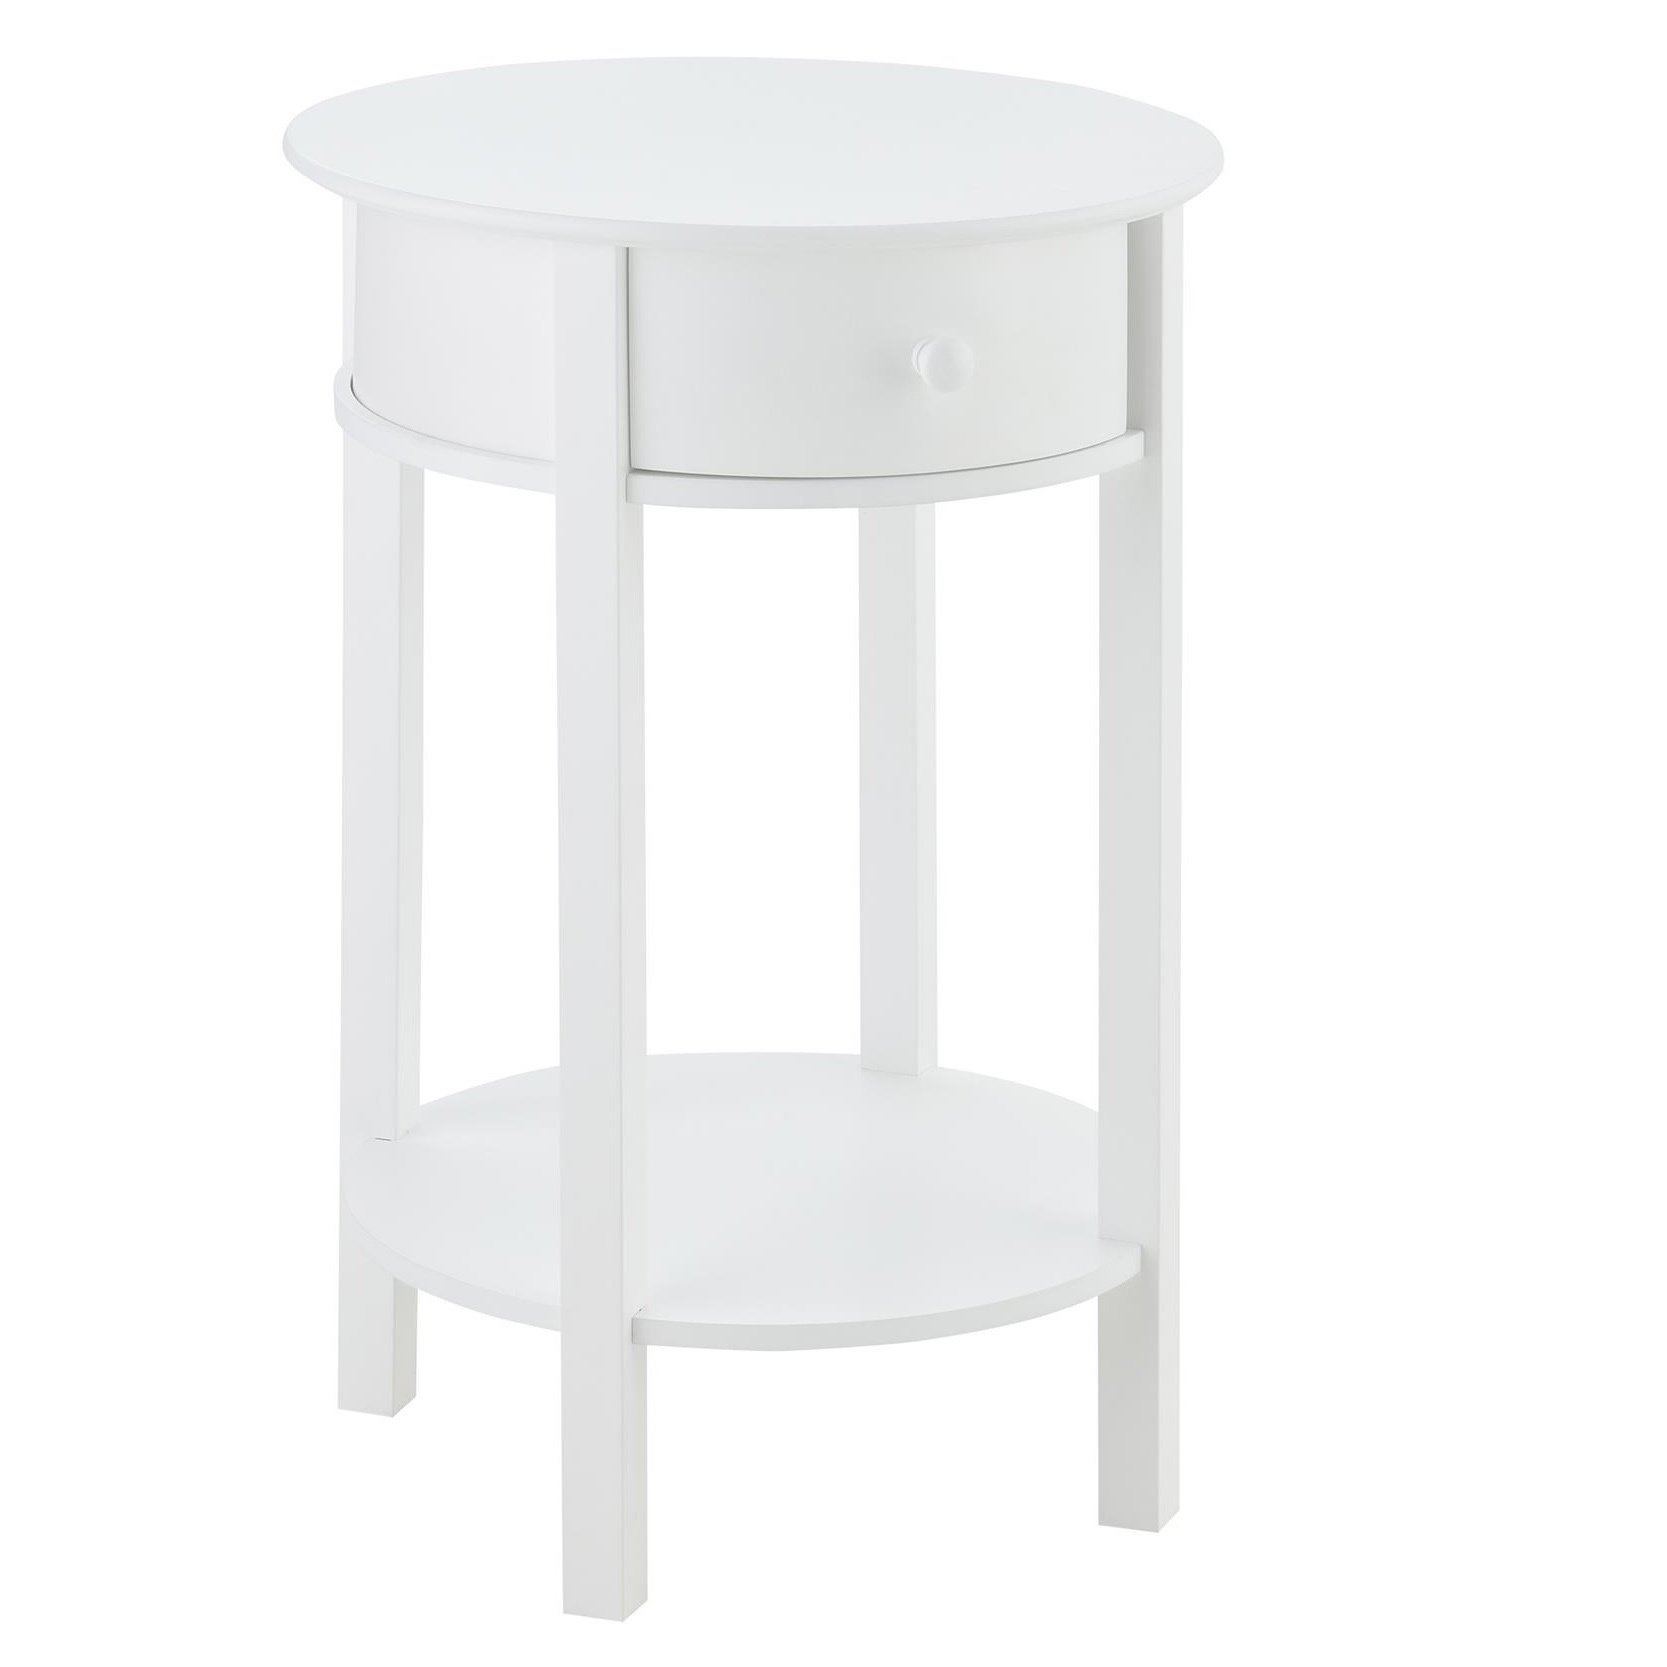 white round end table accent tables carlyle chairside inch wide high copper full size tablecloth for small navy side narrow sofa behind couch ikea storage ideas designs diy modern